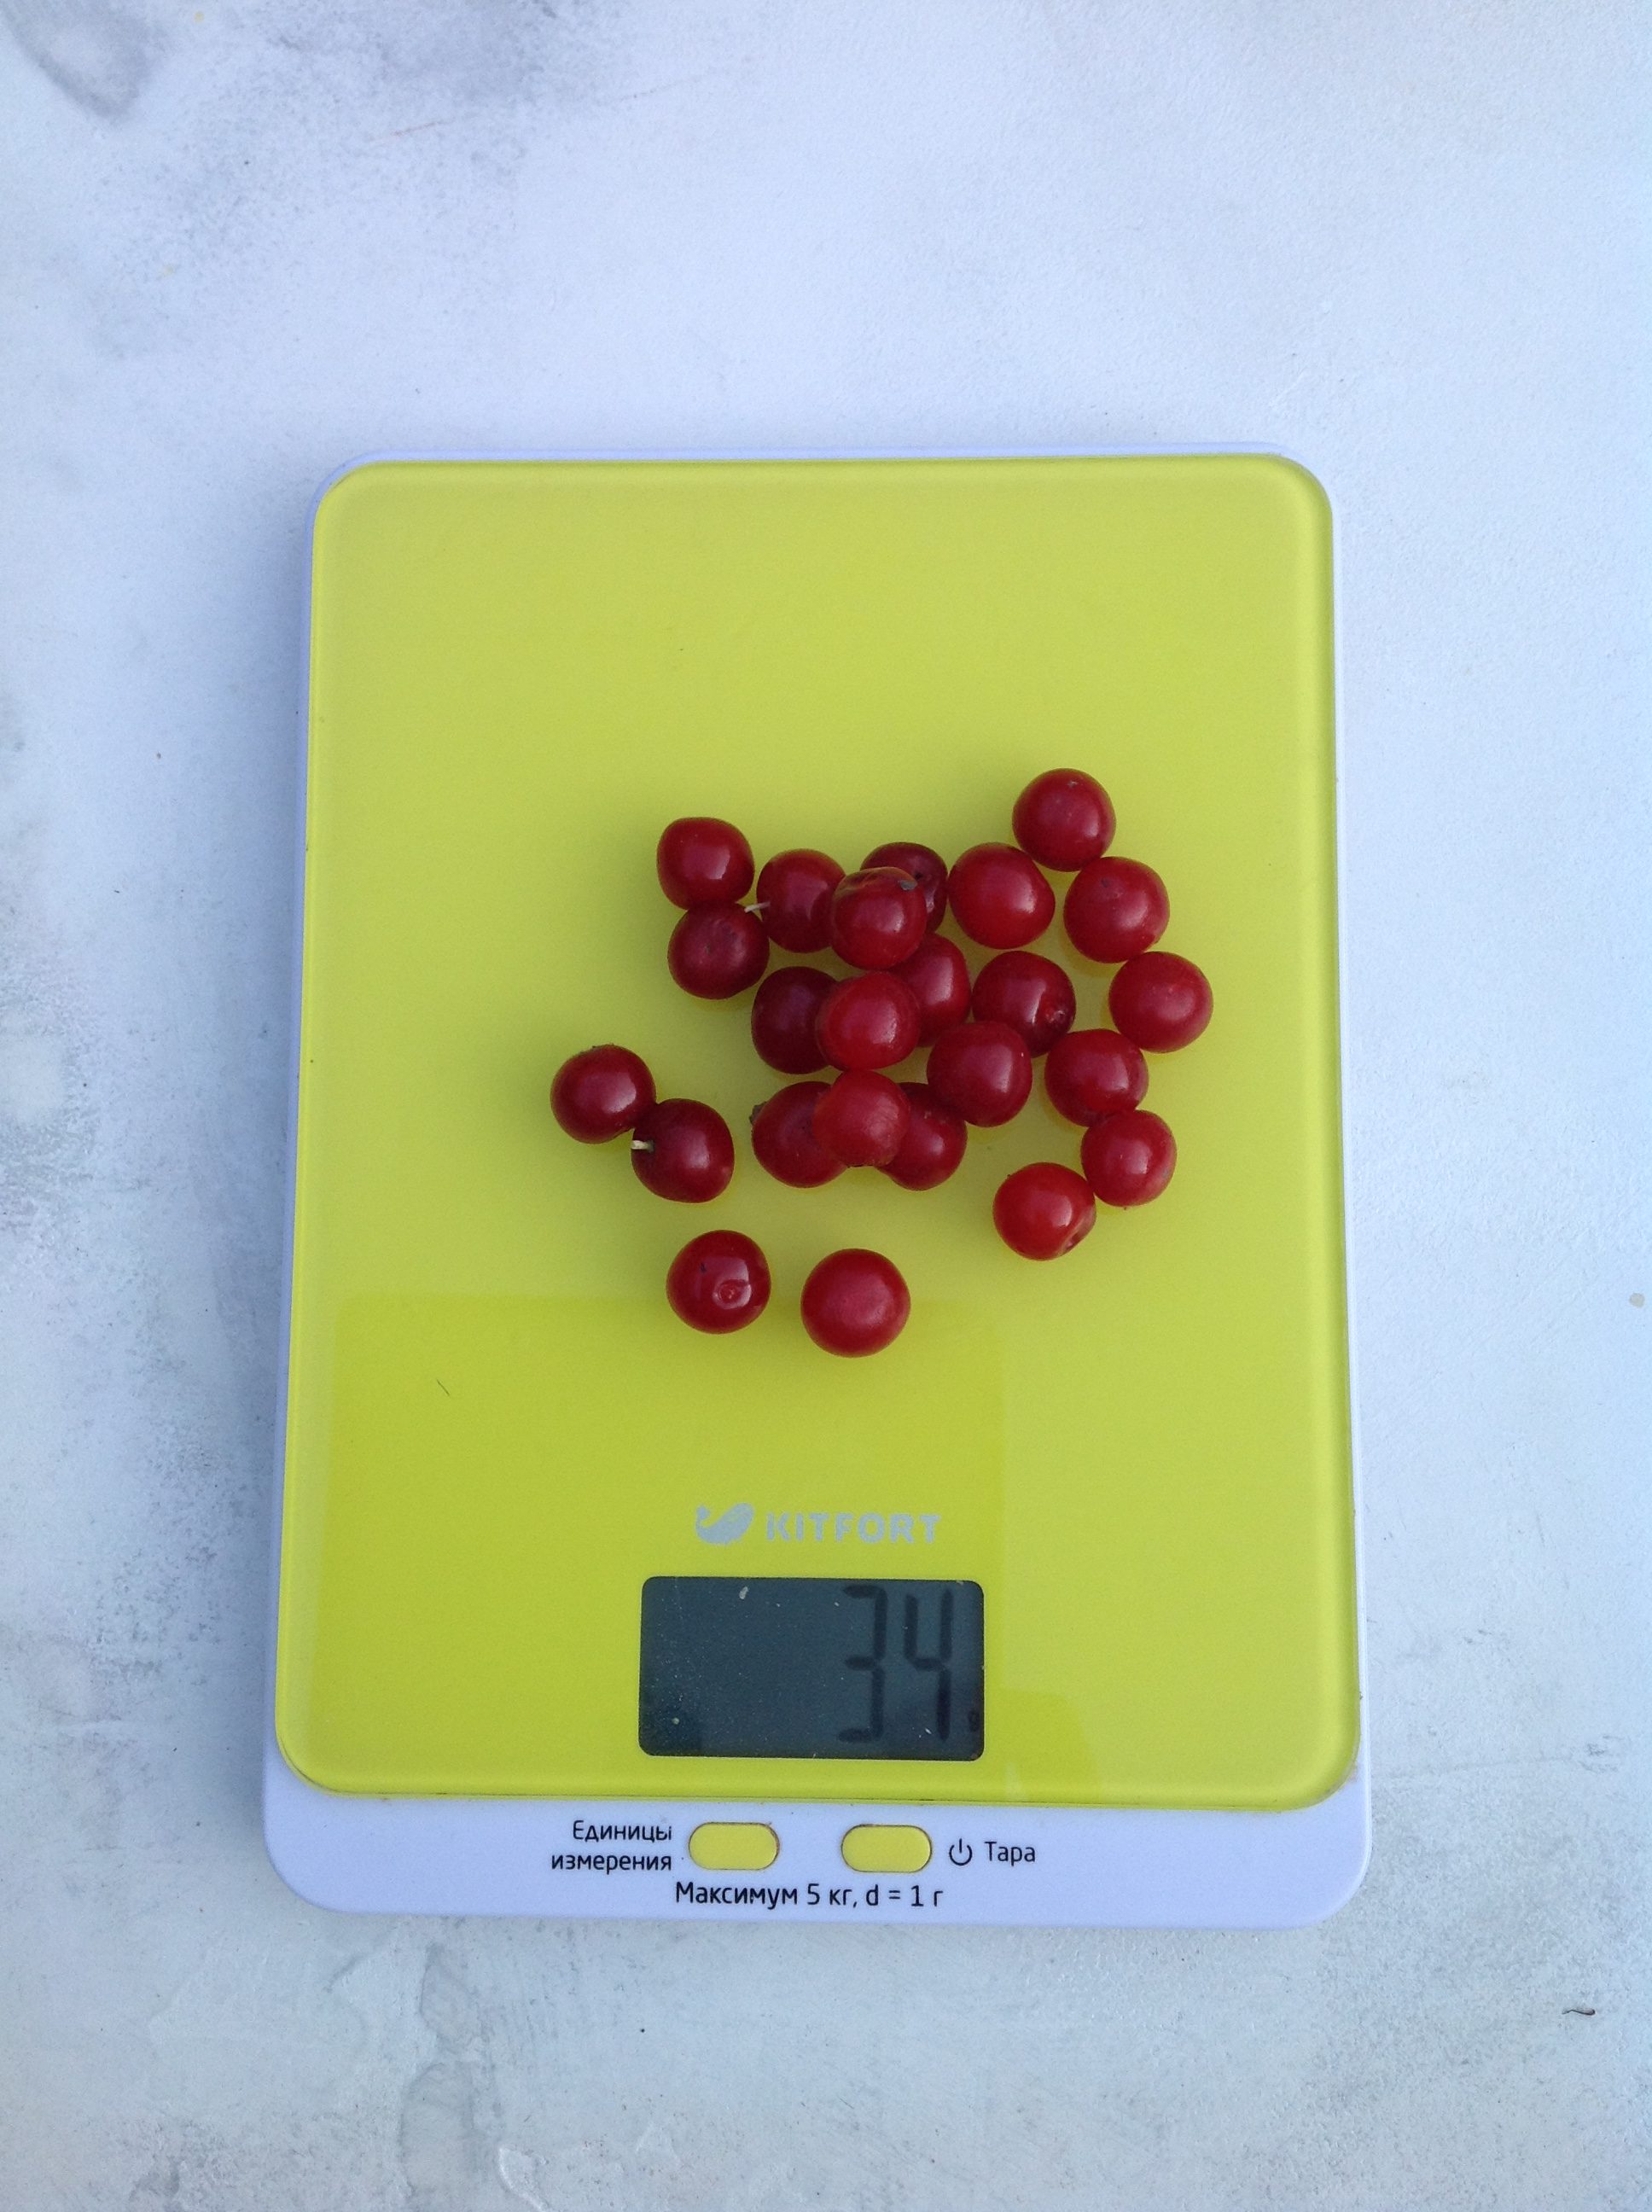 How much does a handful of felted cherries weigh?